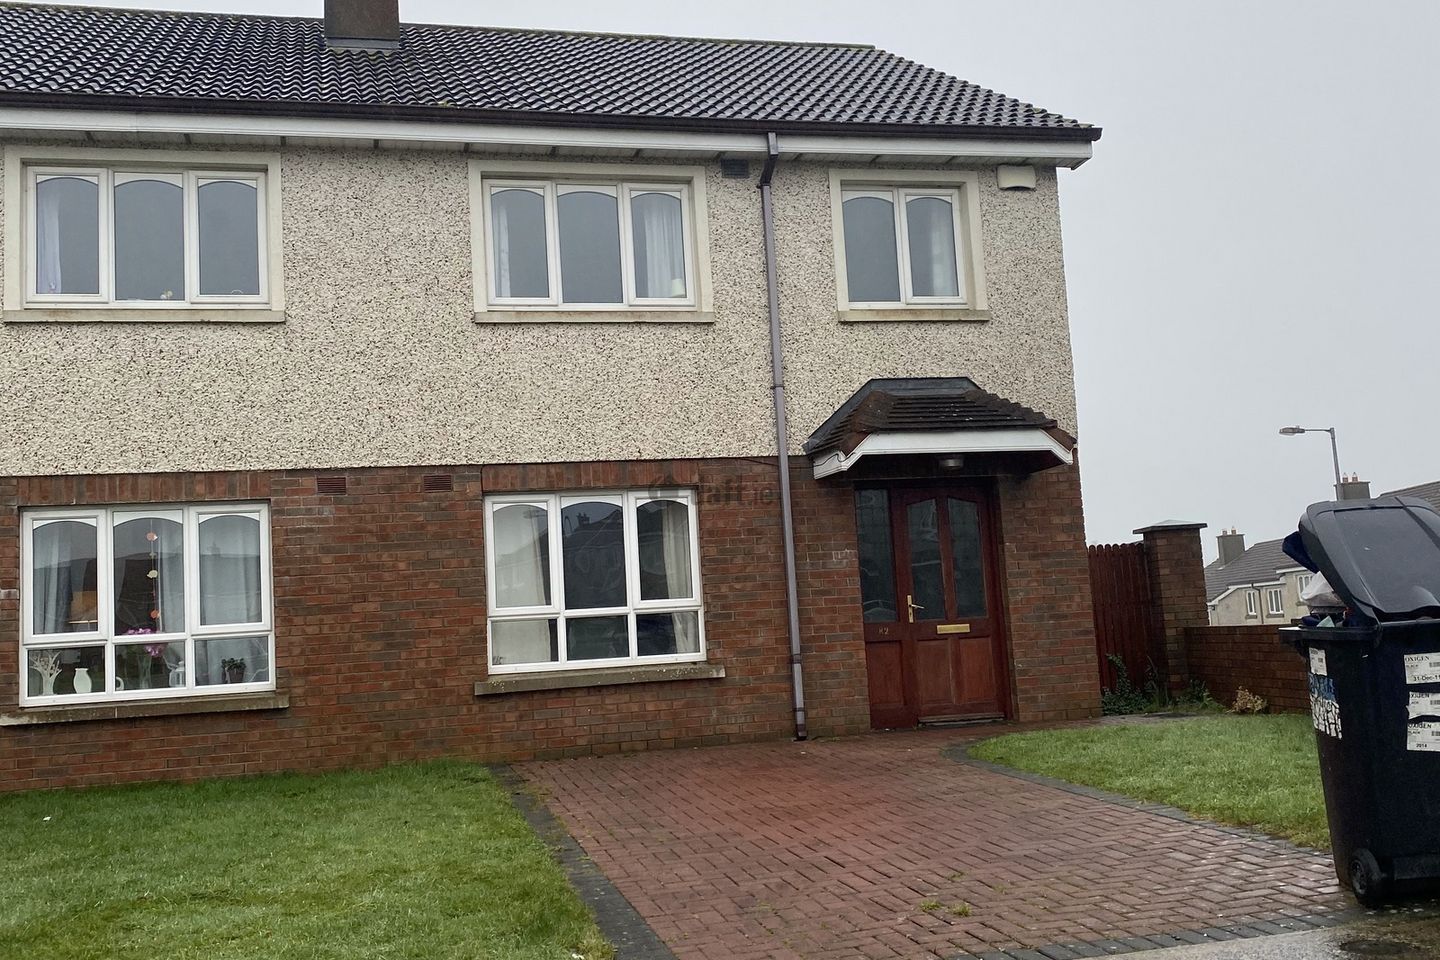 82 Meadowbank, Baile Na Ndeise, Co. Waterford